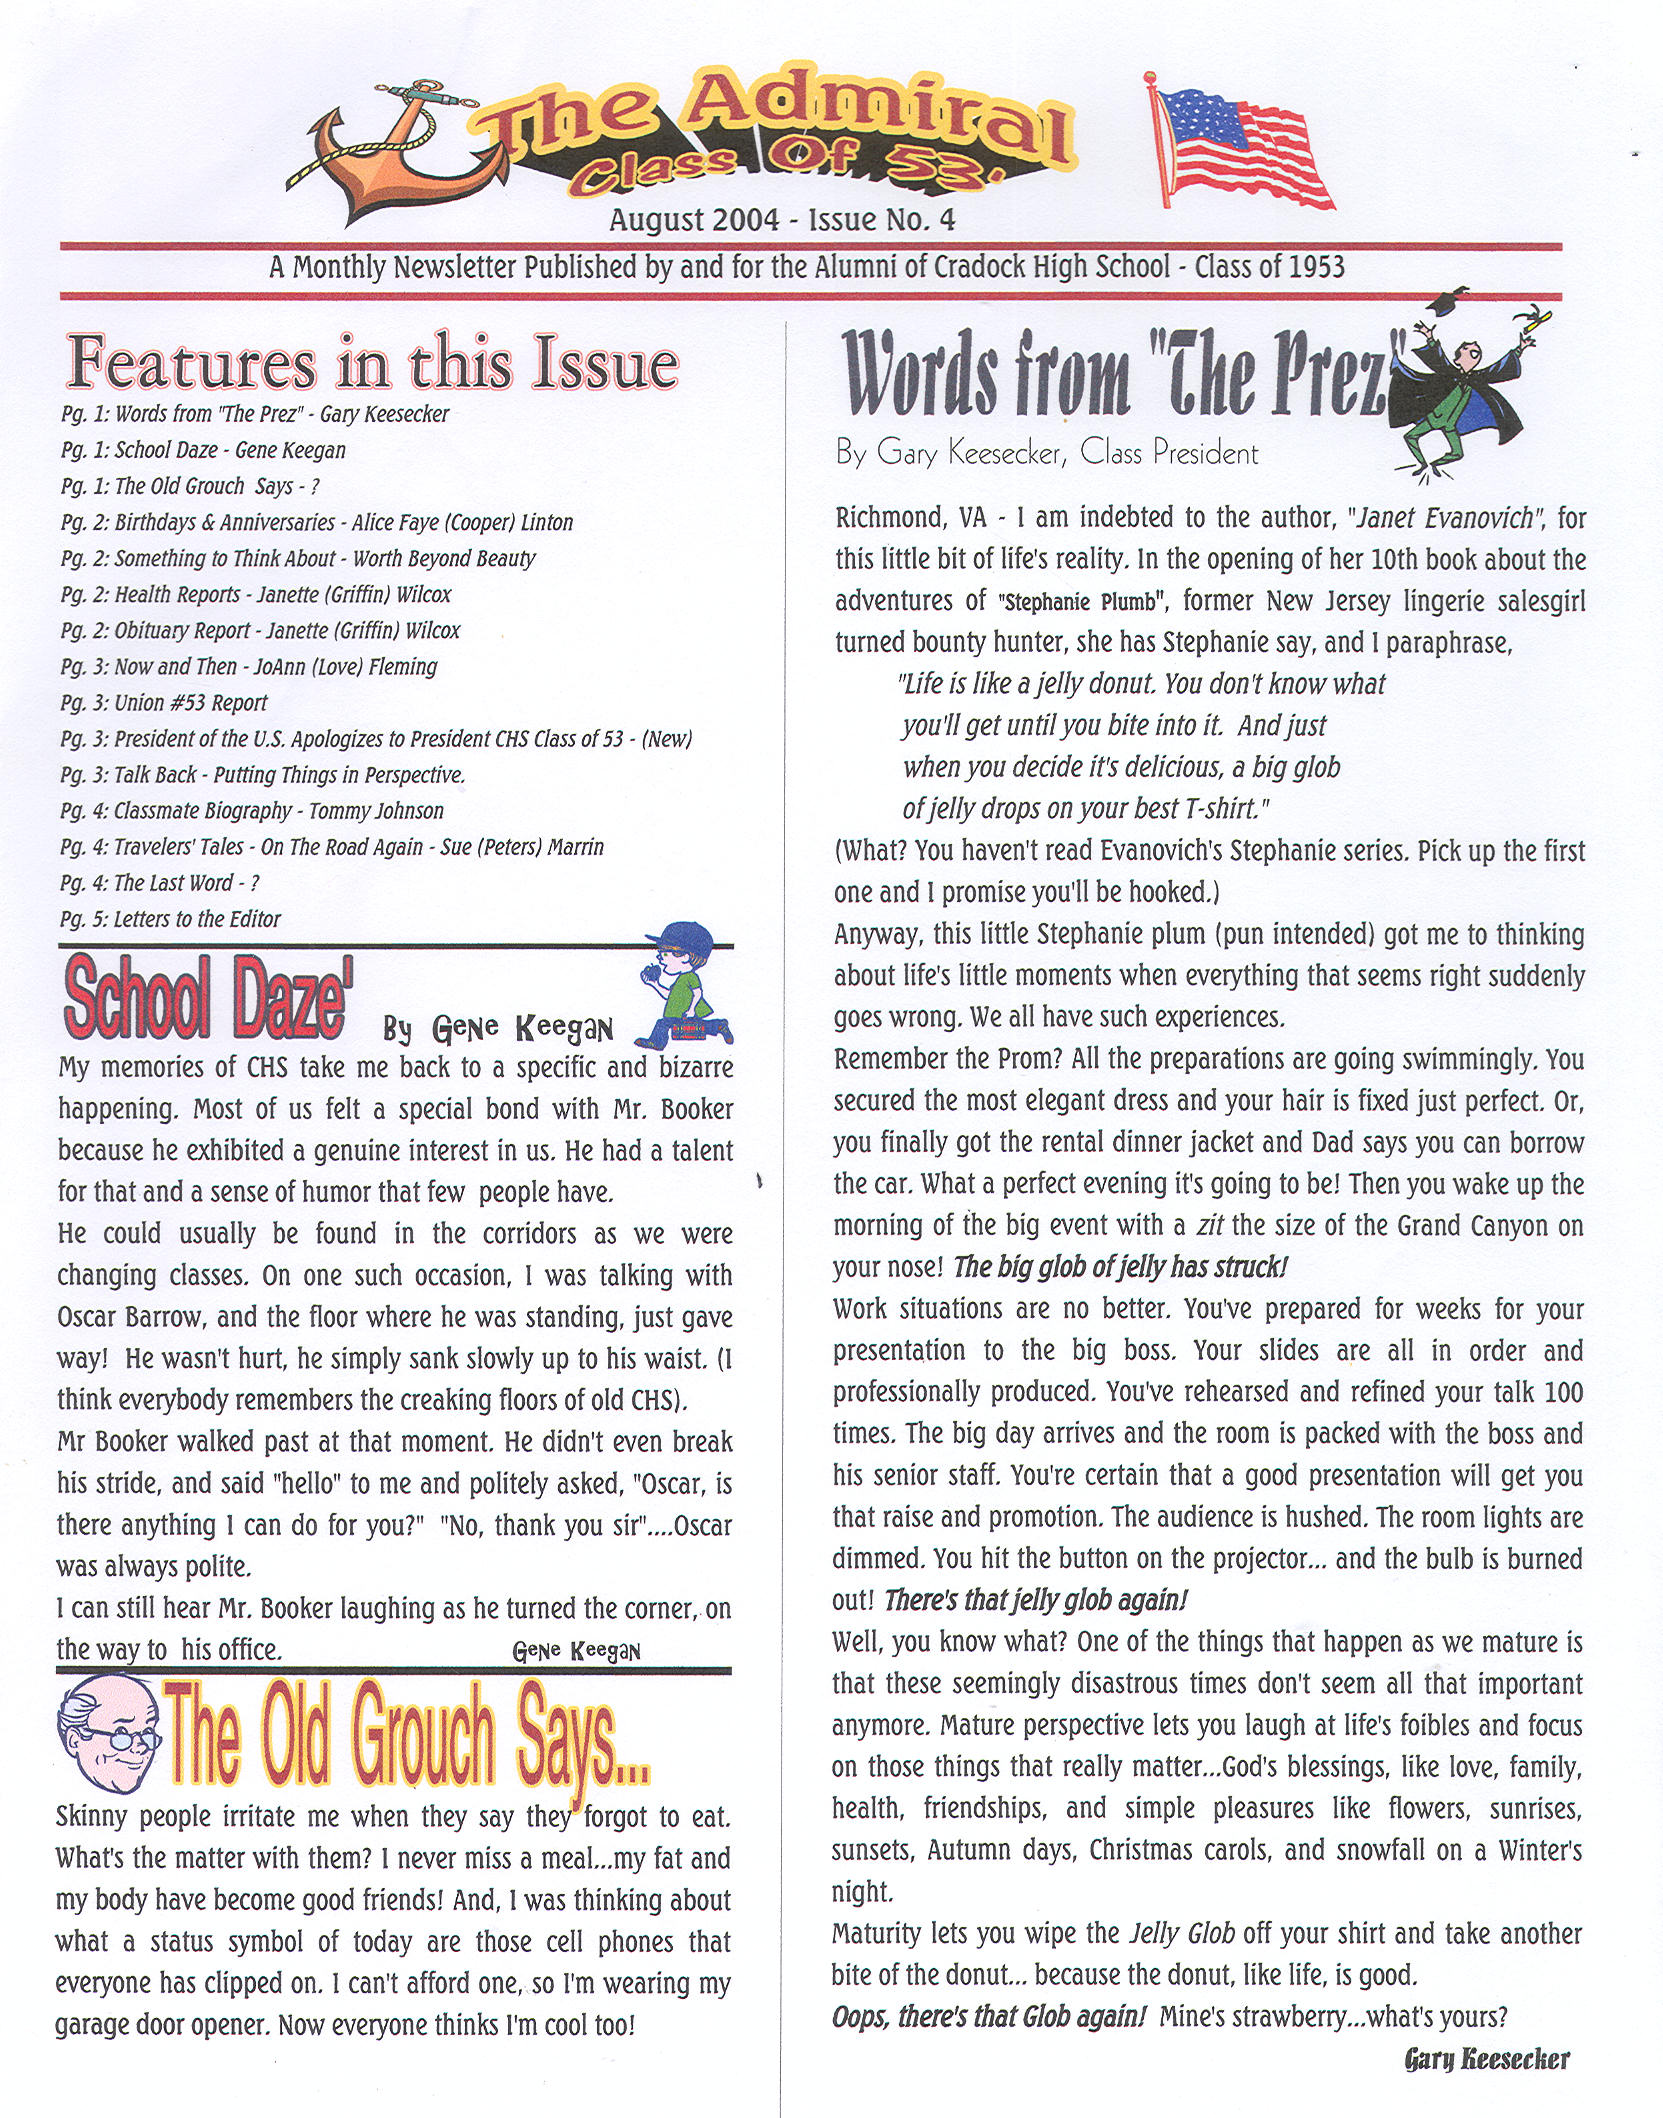 The Admiral - August 2004 - pg. 1